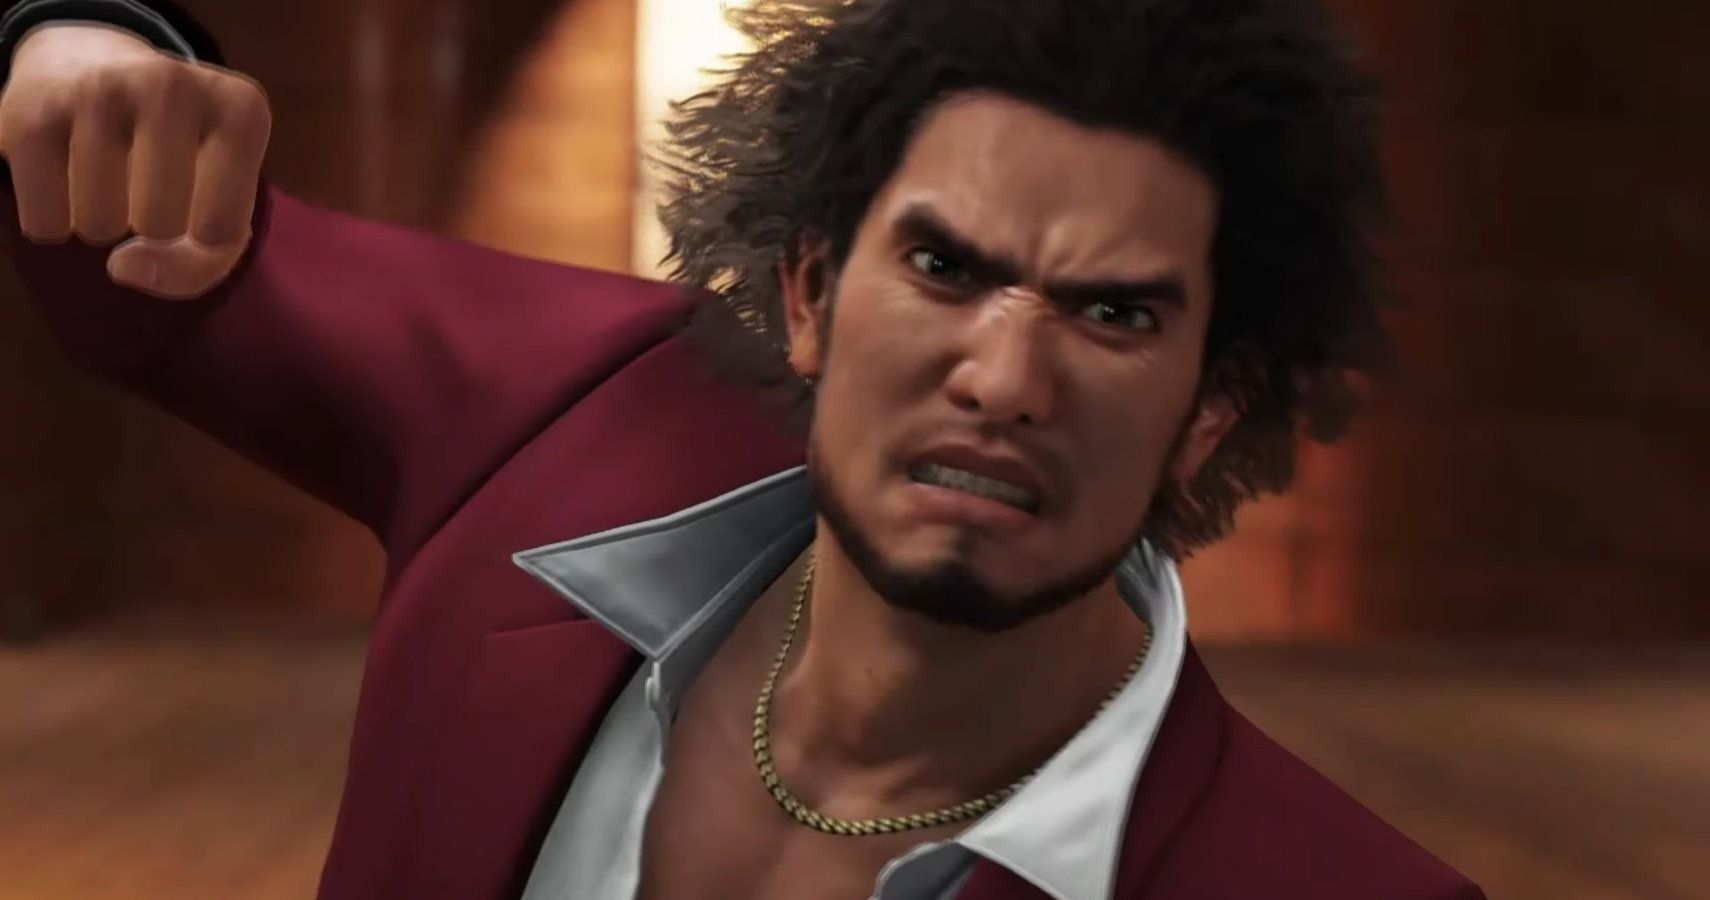 yakuza-like-a-dragon-scheduled-to-release-in-4-days-on-xbox-series-x-s-delayed-indefinitely